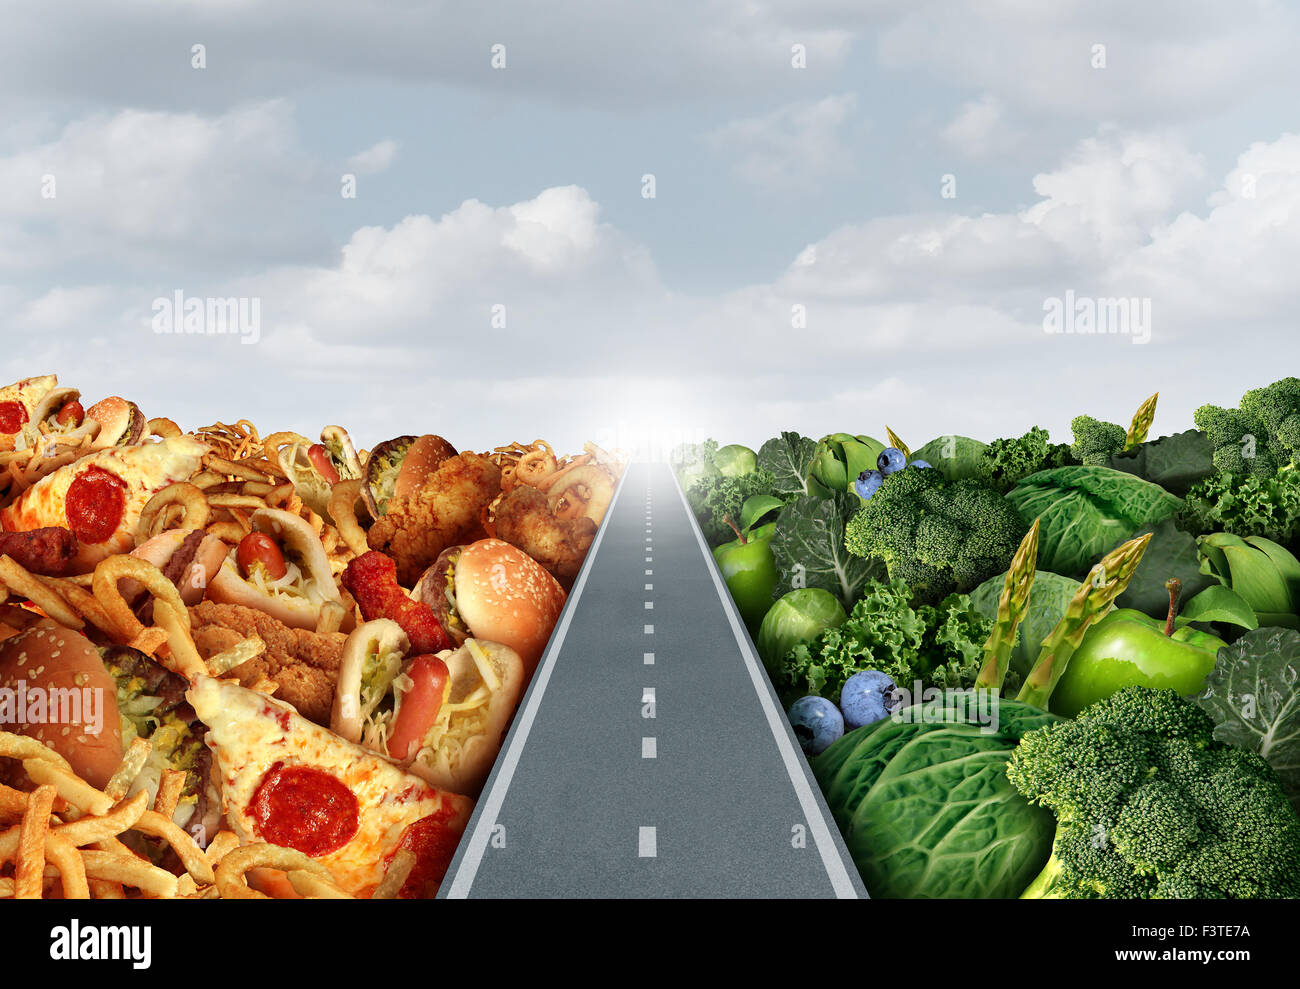 Diet lifestyle concept or nutrition decision symbol and food choices dilemma between healthy good fresh fruit and vegetables or Stock Photo